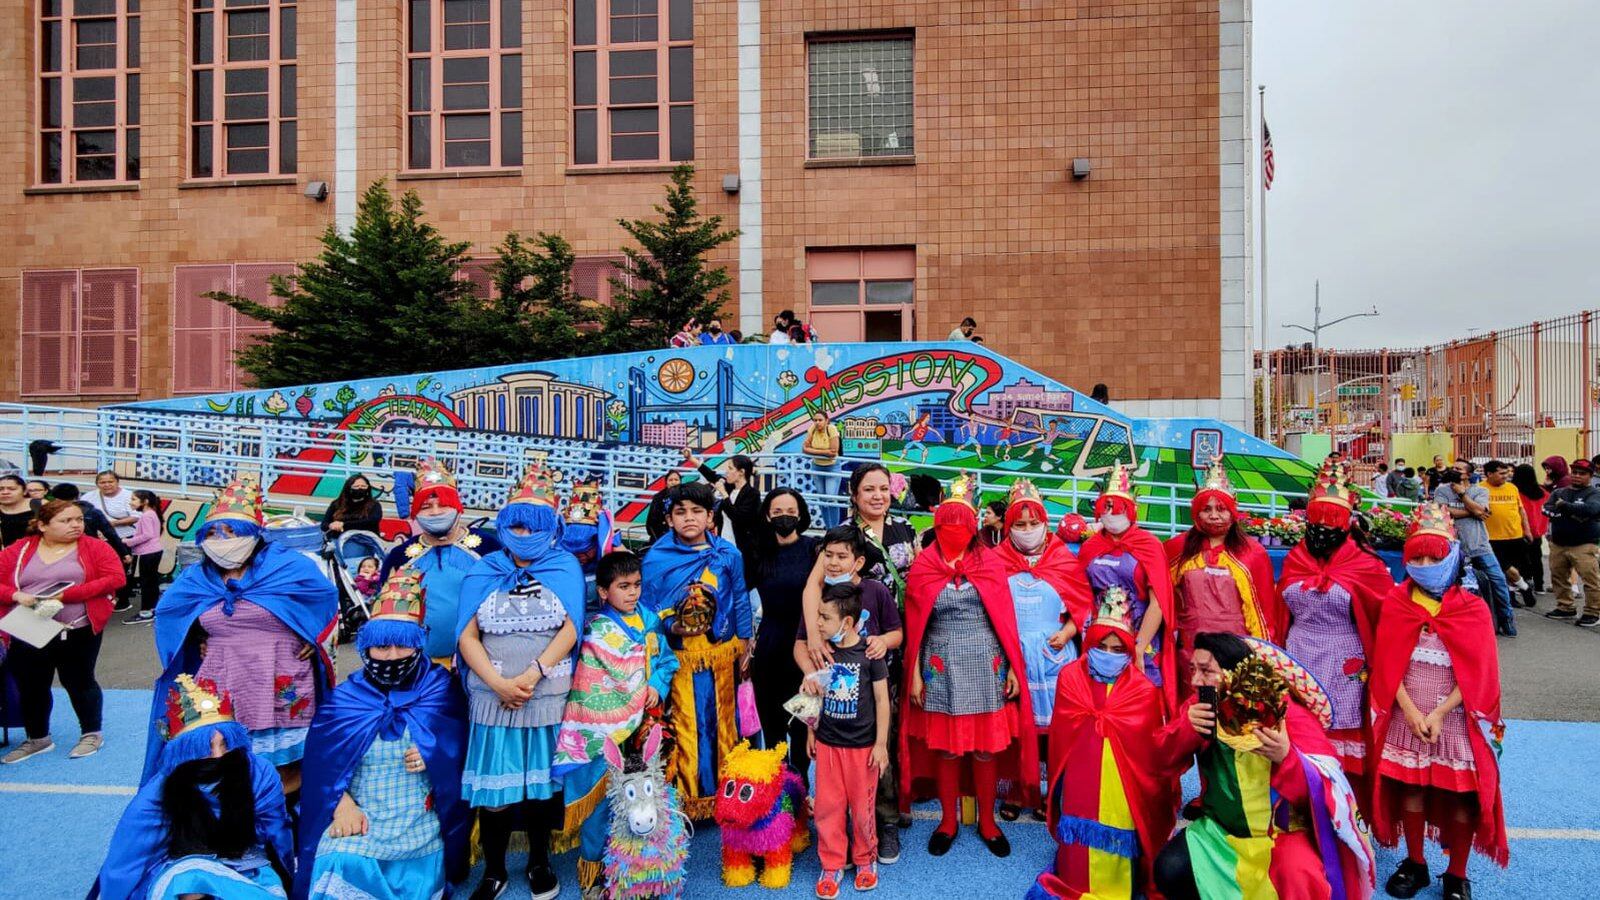 Parents and students in bright blue and red costumes line up in front of a school mural outside of a brick building.